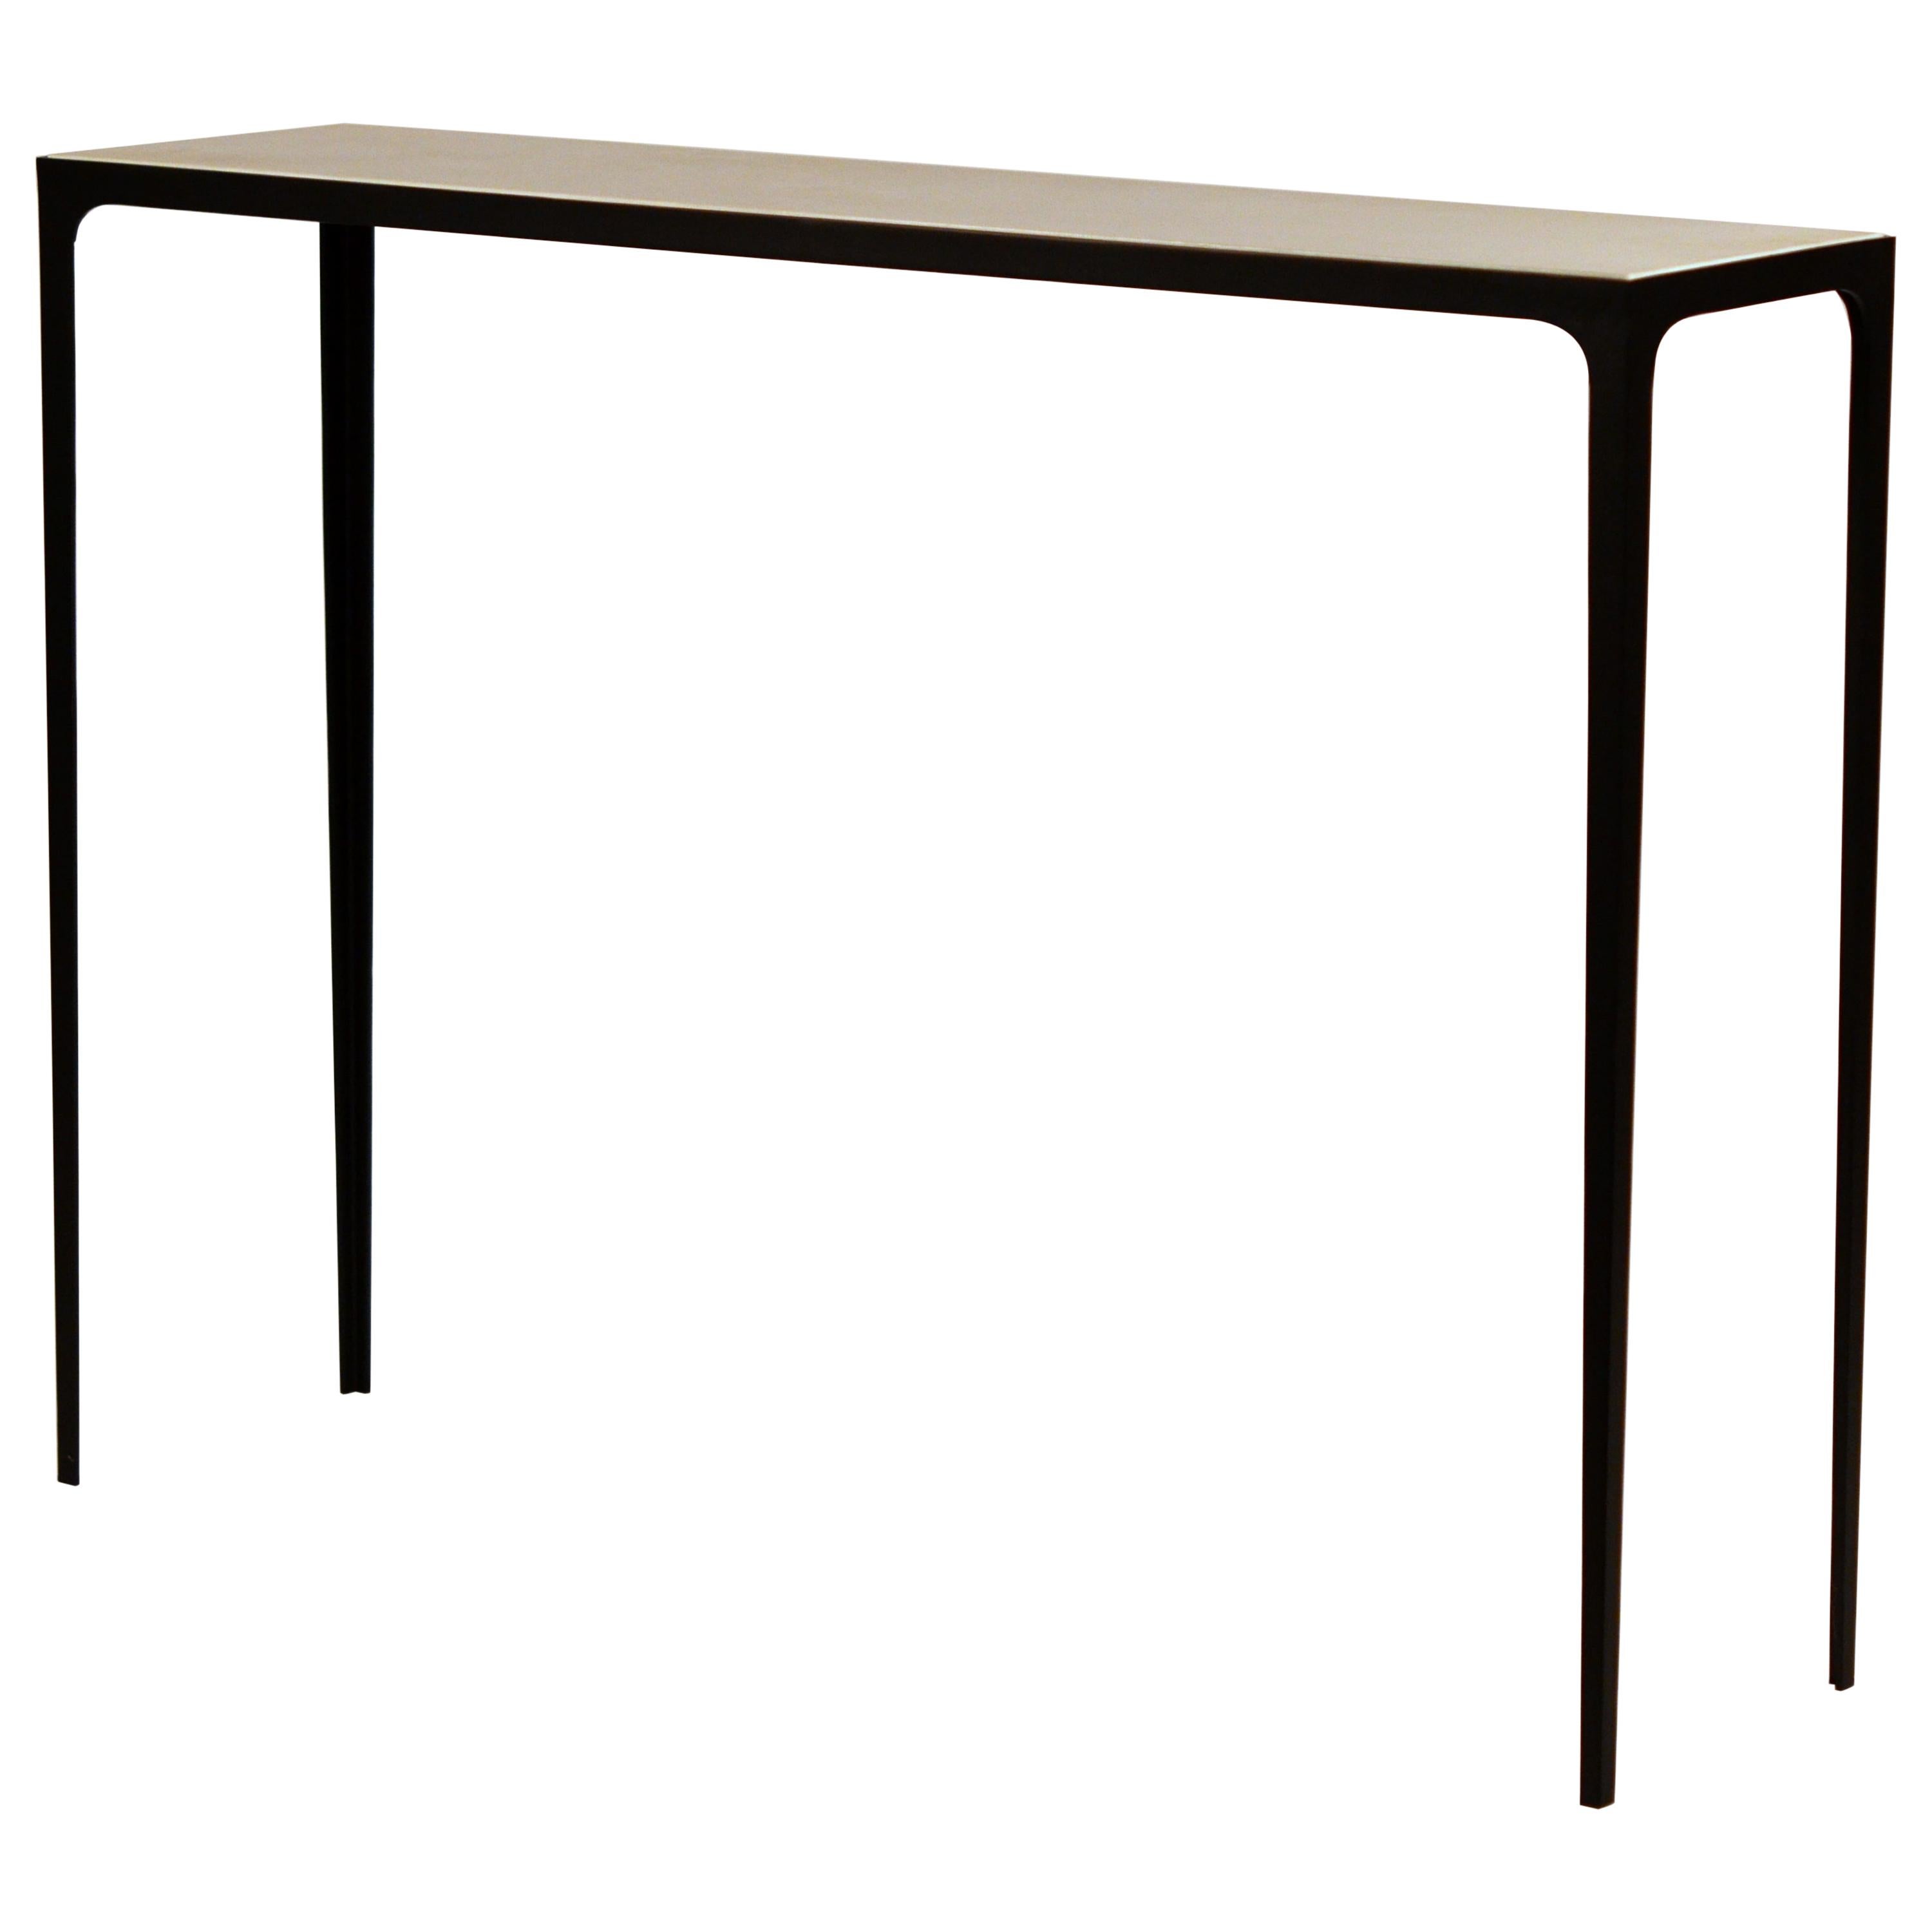 Long 'Esquisse' Wrought Iron and Cream Parchment Console by Design Frères